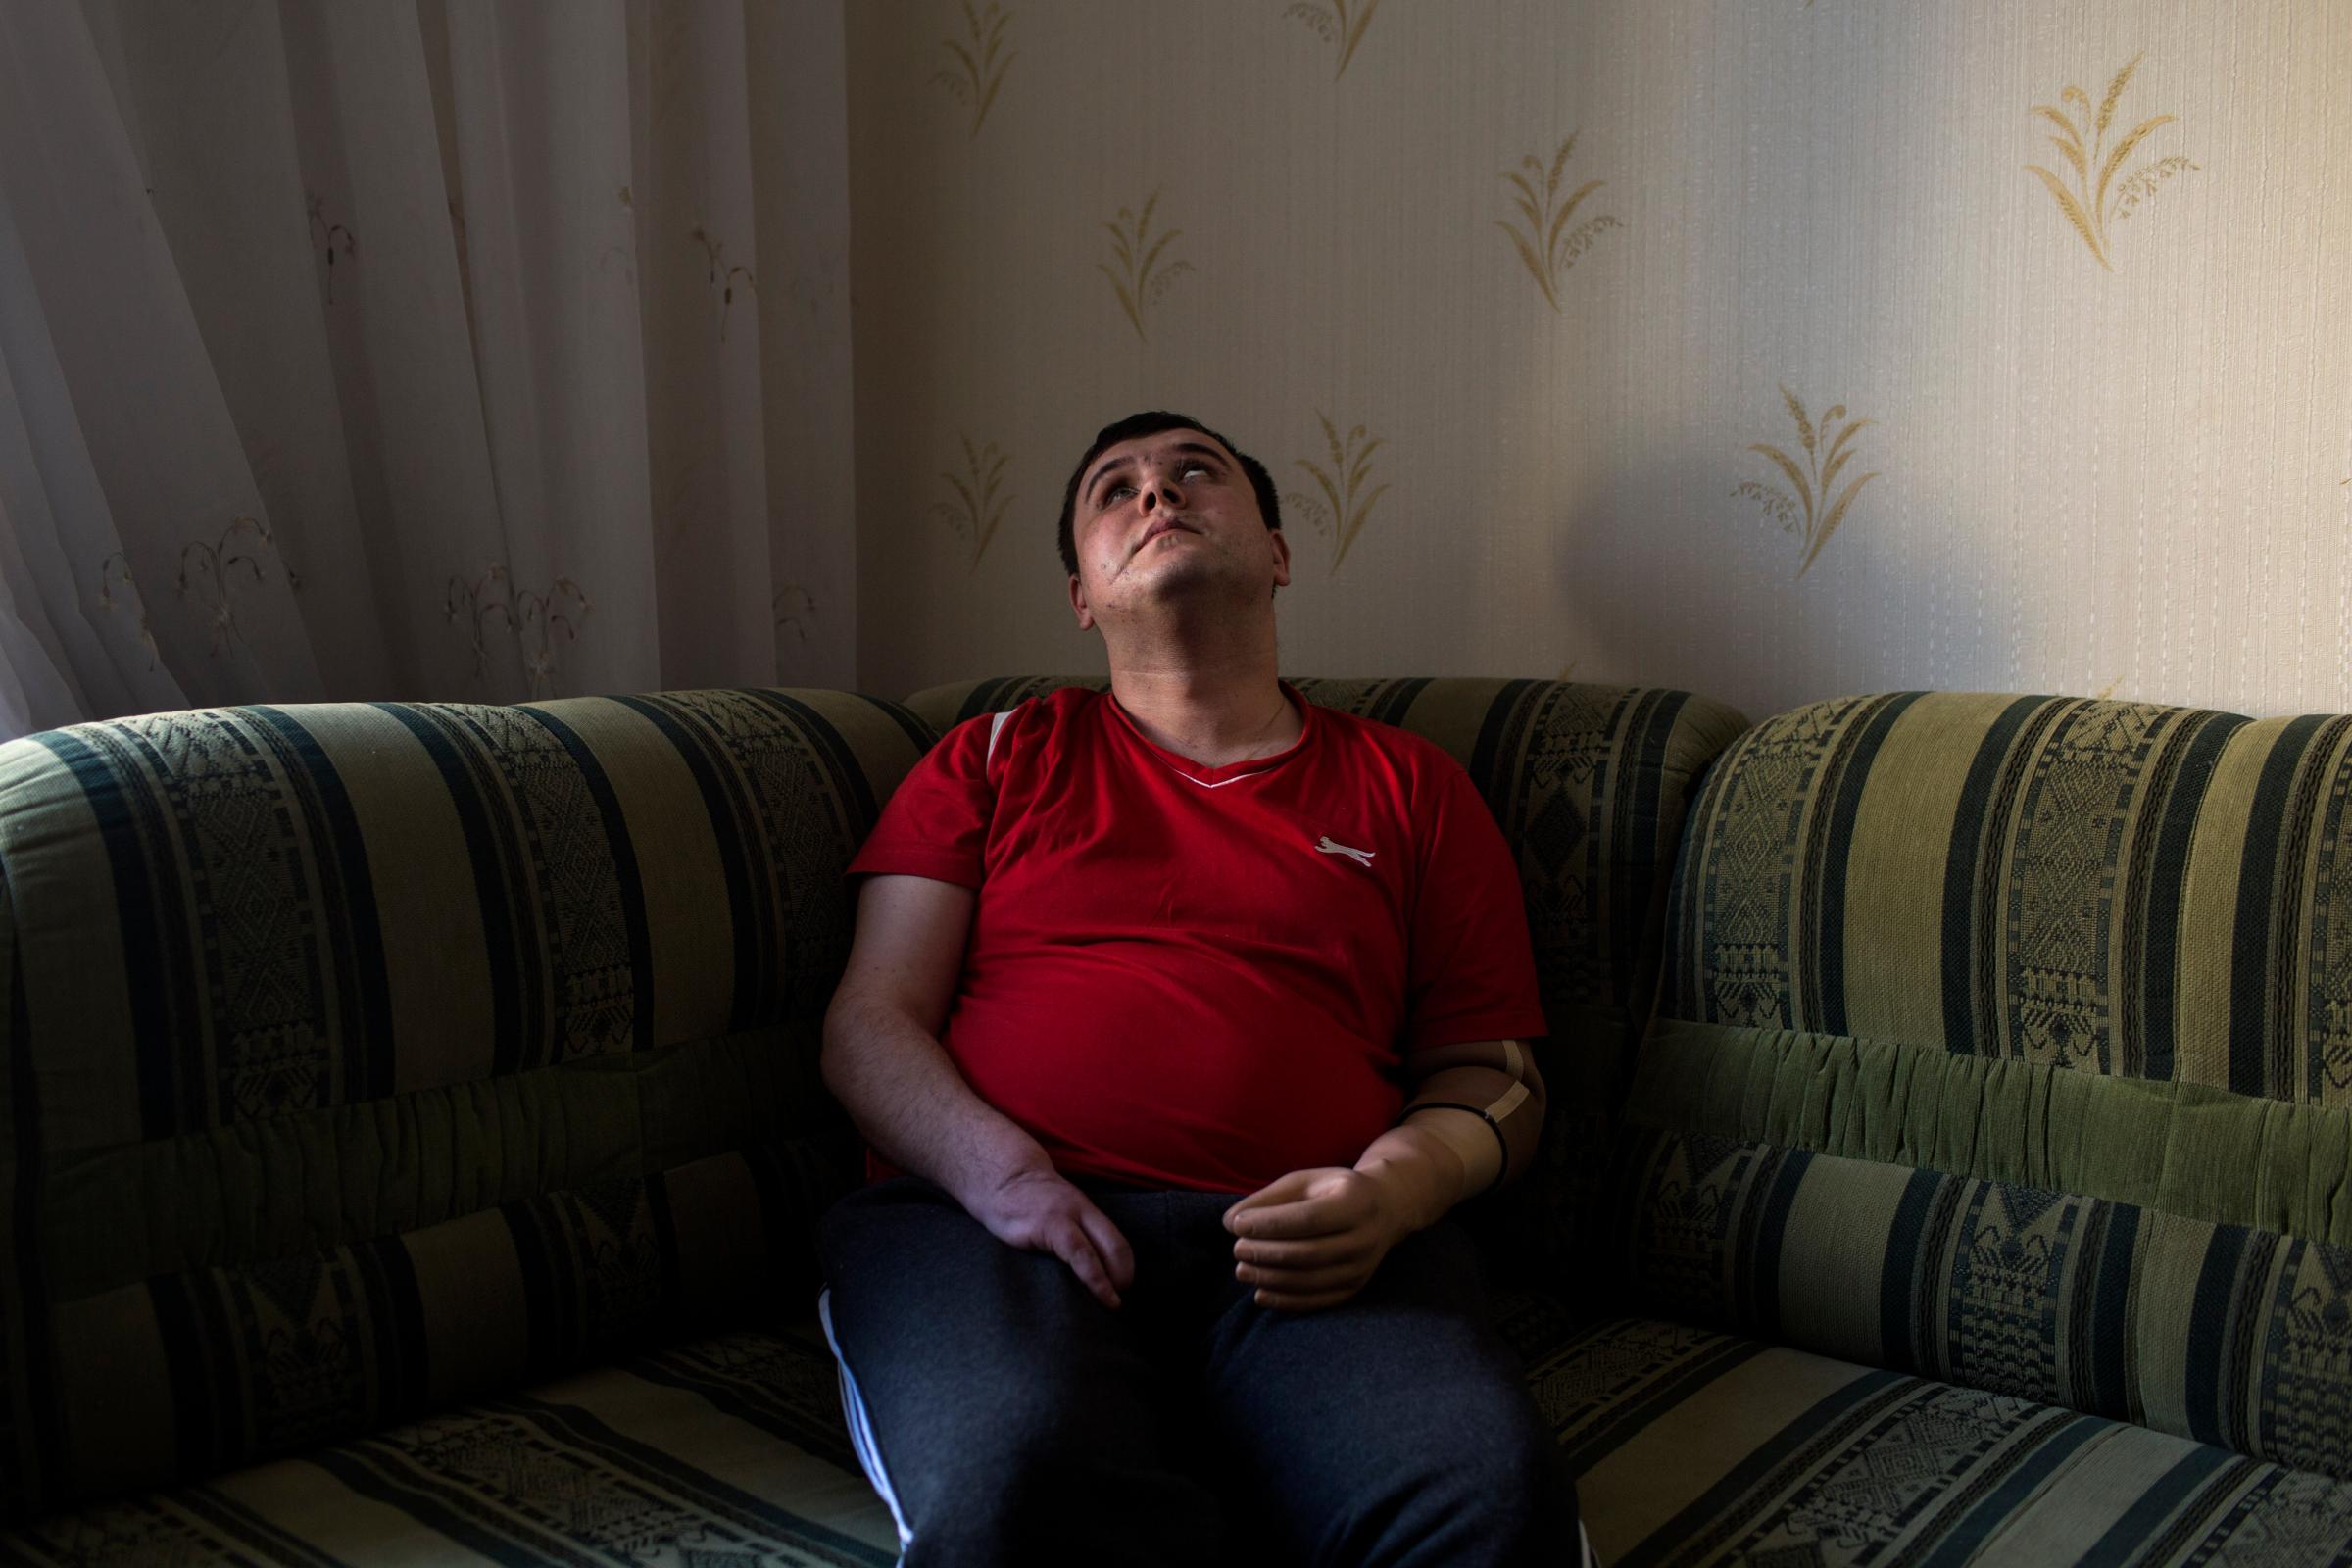 Ivan Kushnerov, 25, rests on a couch in an apartment where he is staying temporarily in Kiev, Ukraine, March 4, 2015. Kushnerov, who lives in Zaporizhia, was severely wounded in Severodonetsk in November 2014 while serving in the 39th Territorial Defense Battalion of the Ukrainian army. His left hand and three fingers on his right hand were amputated, and he has problems with his vision and legs. He worked in advertising before the war and is currently studying part-time to become a journalist. "I feel the pain. Sometimes it is phantom pain. I often have a headache, and my scars ache. This pain is always with me. But, if you feel pain, it means you are alive," he said. "I am now distracted by a lot of things. I require medical treatment, but I want to tighten my fists and go there [to war] because I am very worried about my guys. However, I realize that I will be only a burden for them now."